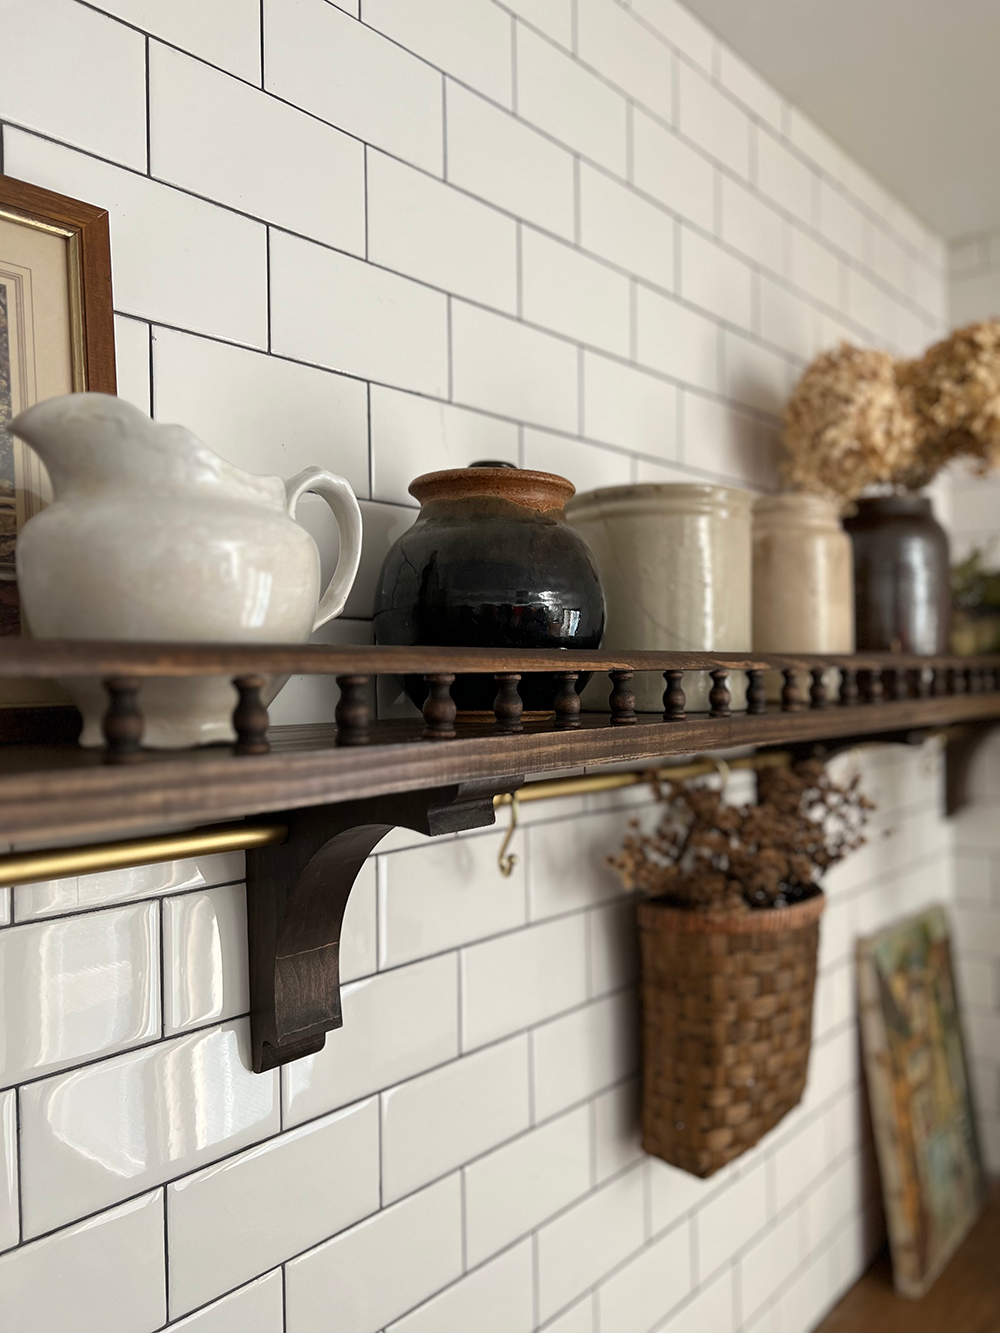 How to Build a Shelf with a Wood Gallery Rail - BREPURPOSED